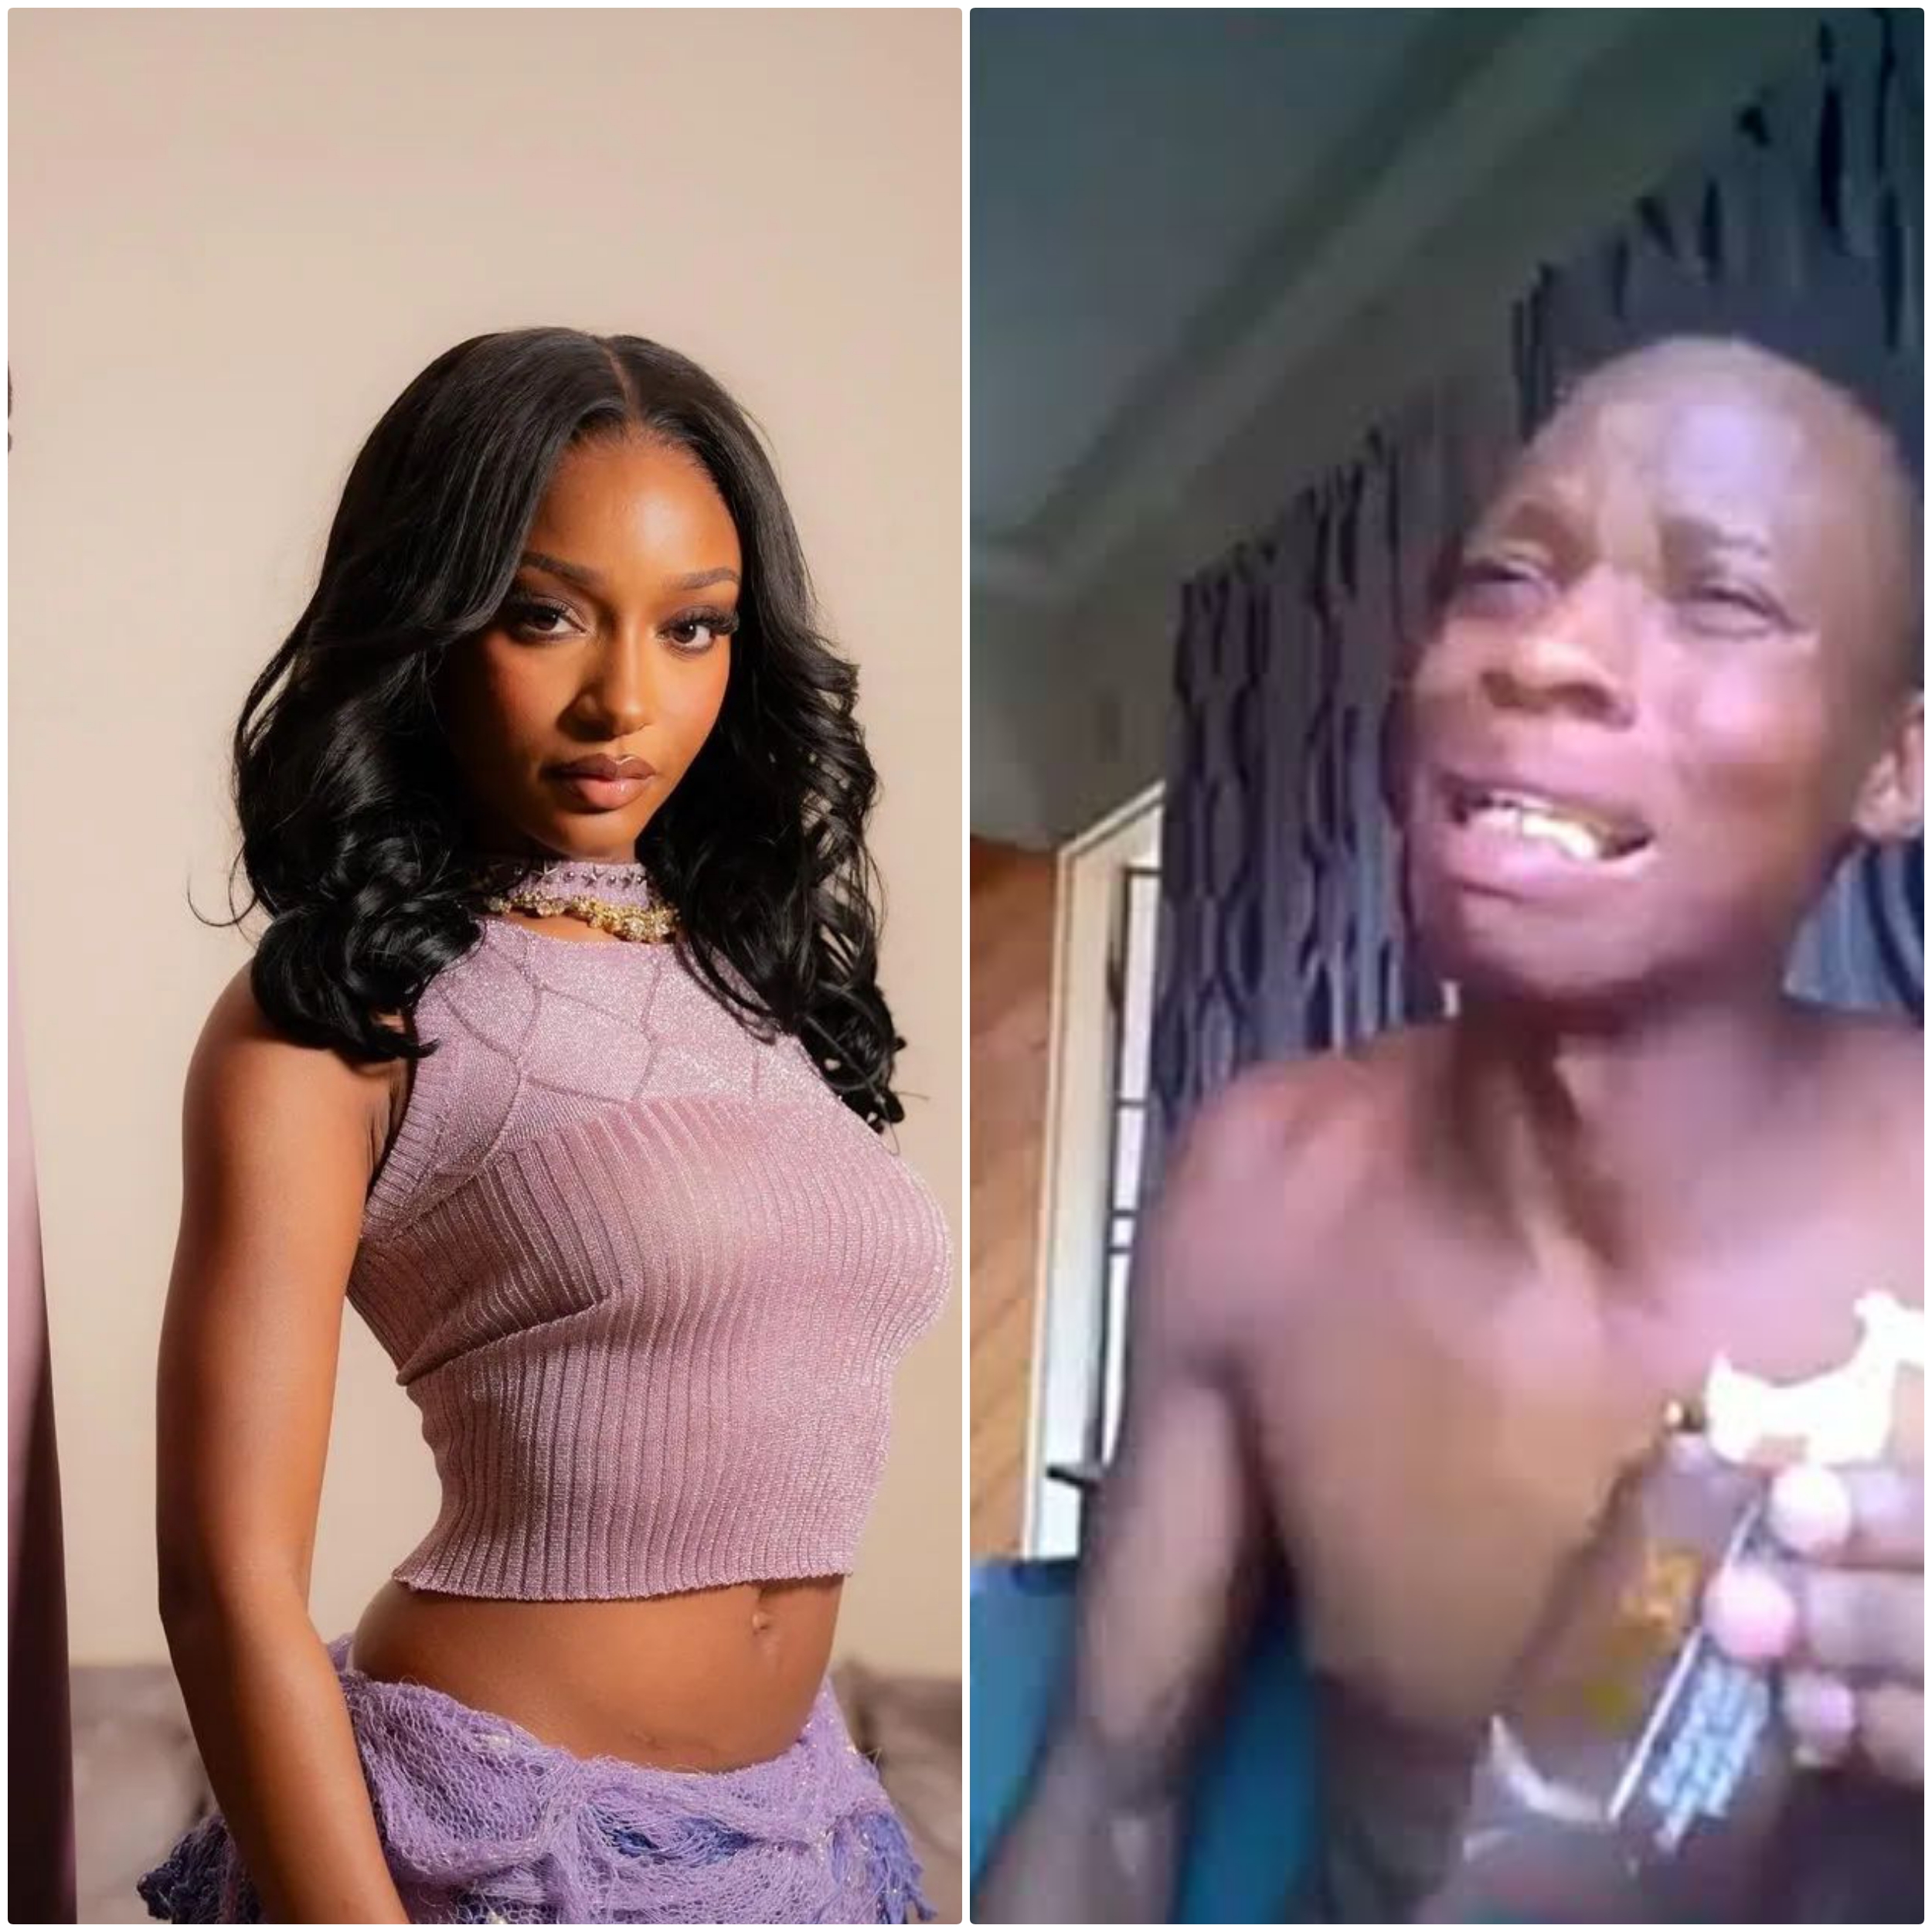 “I Am Sorry For Breaking Your Heart, I Did Not Know You Will Be Rich” – Nigeria Man Begs Ayra Starr